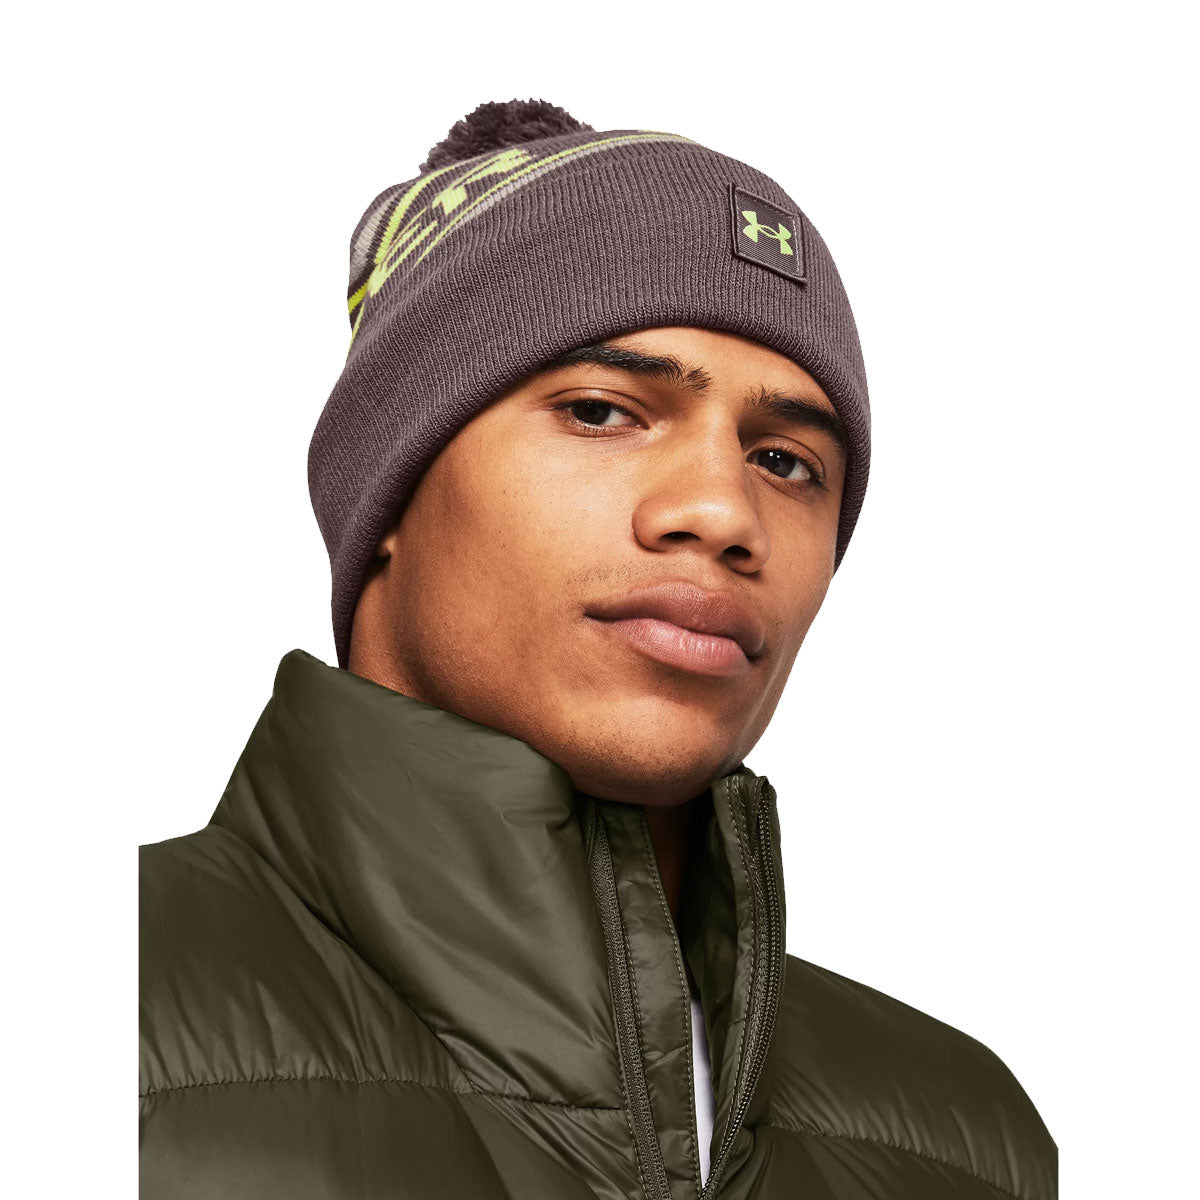 Under Armour Halftime Pom Beanie - Ash Taupe/Lime Yellow